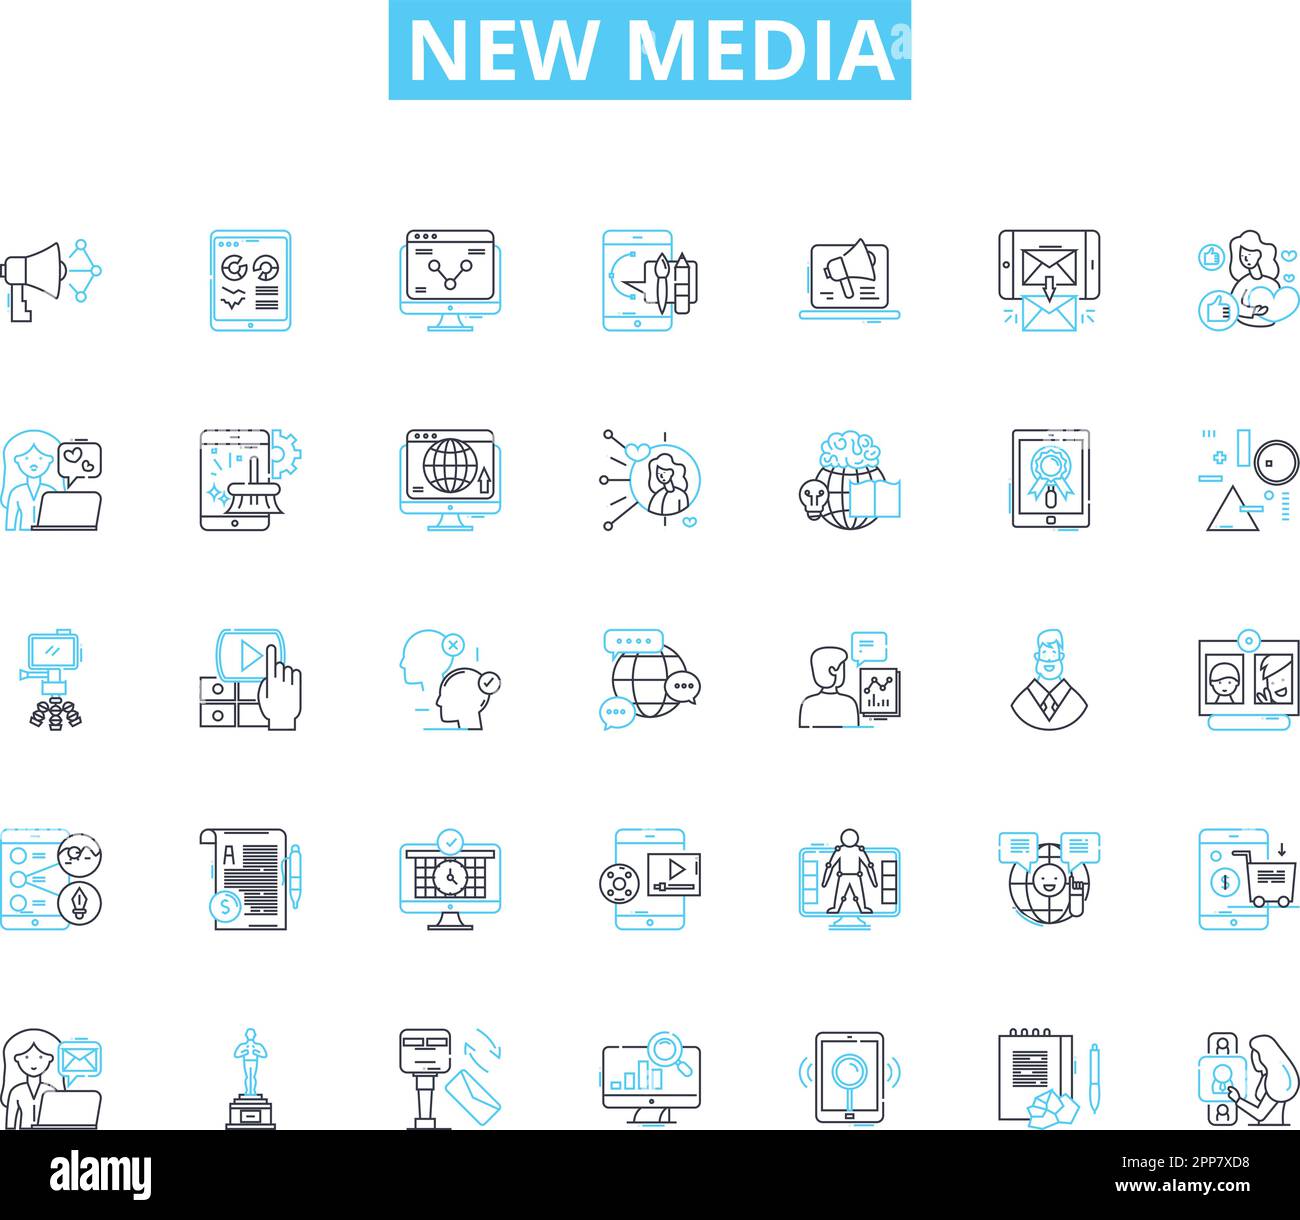 New media linear icons set. Interactivity, Digitalization, Connectivity, Innovation, Disruption, Virality, Collaboration line vector and concept signs Stock Vector